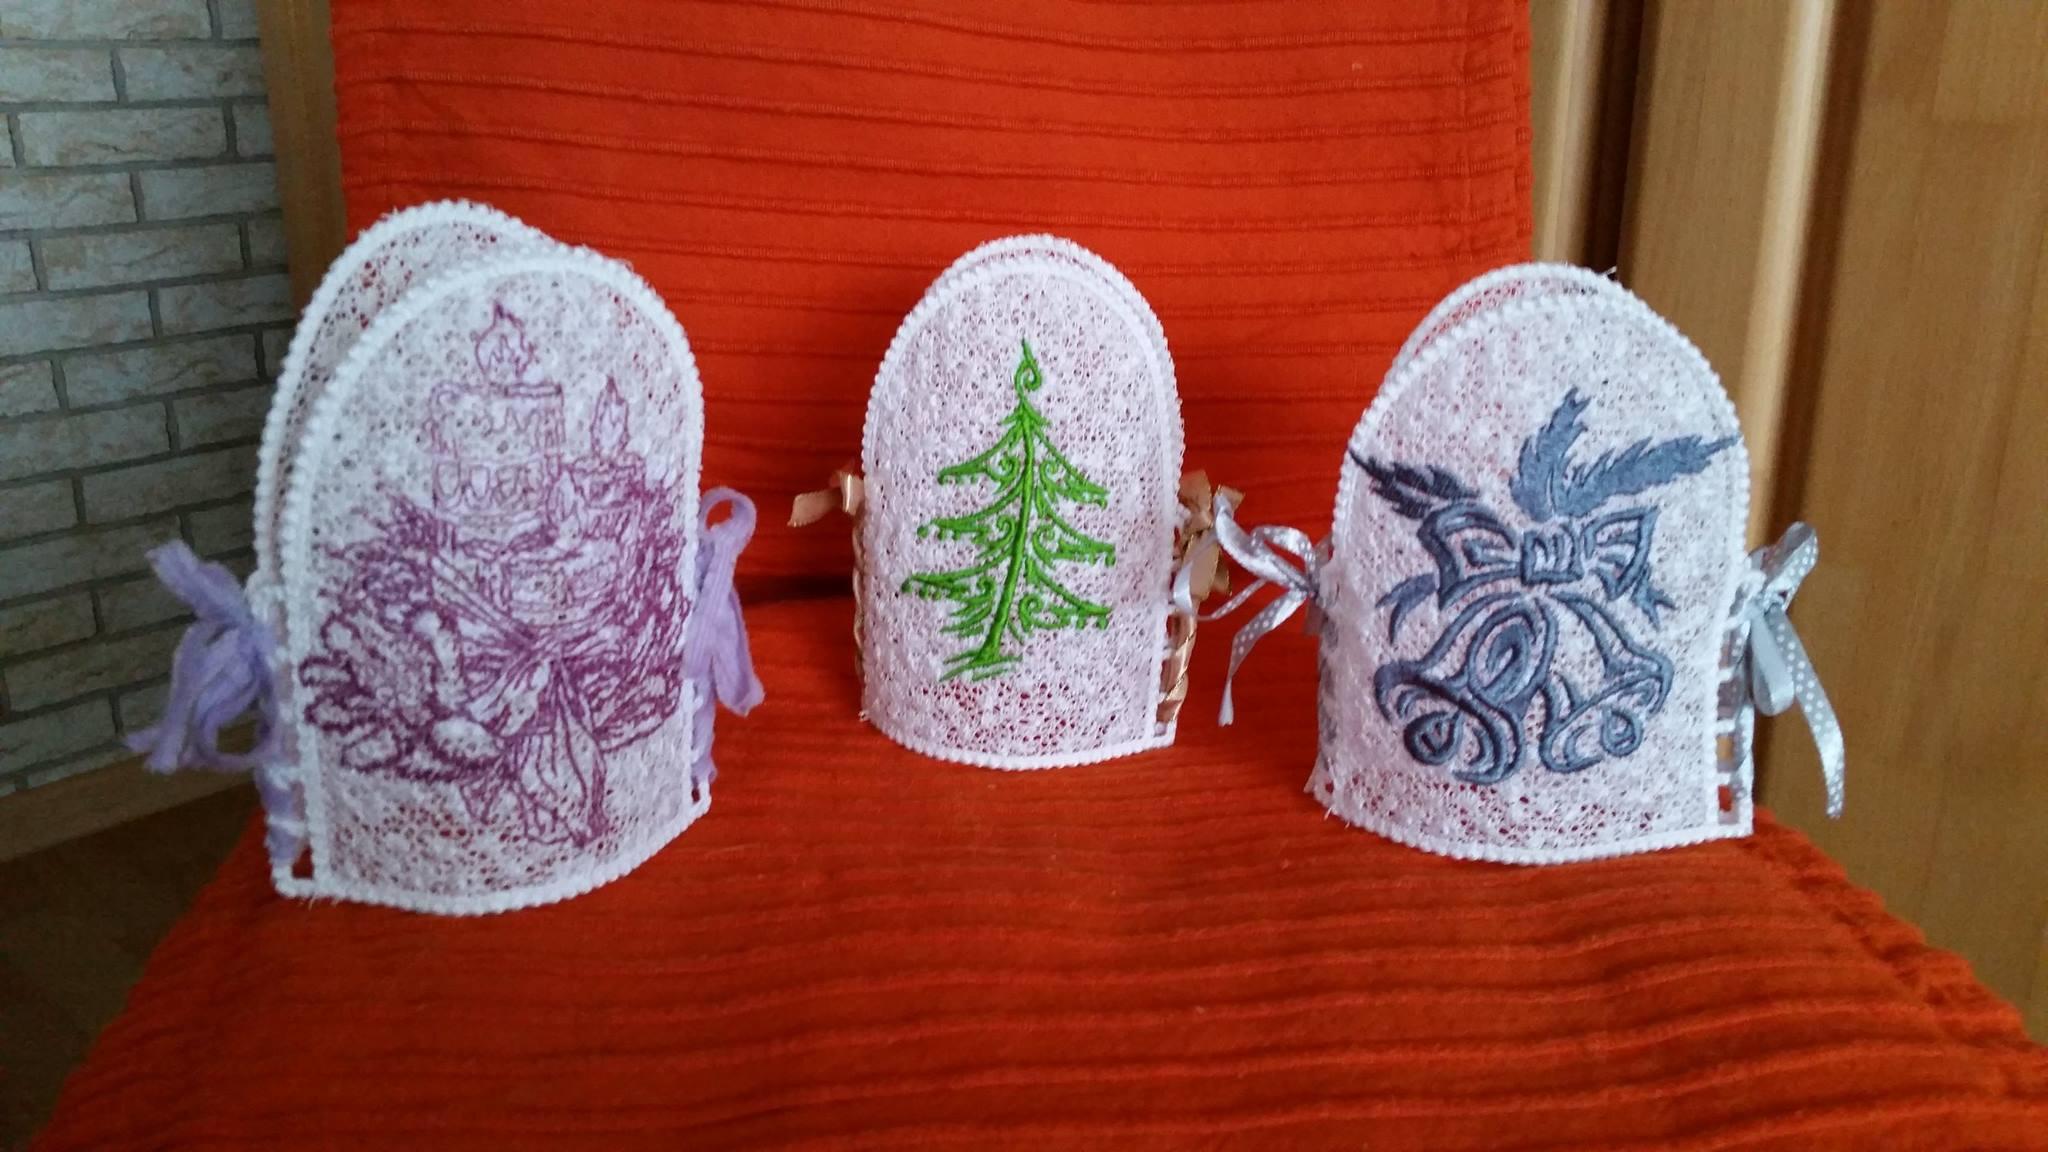 Embroidered knitted Christmas souvenirs with free designs